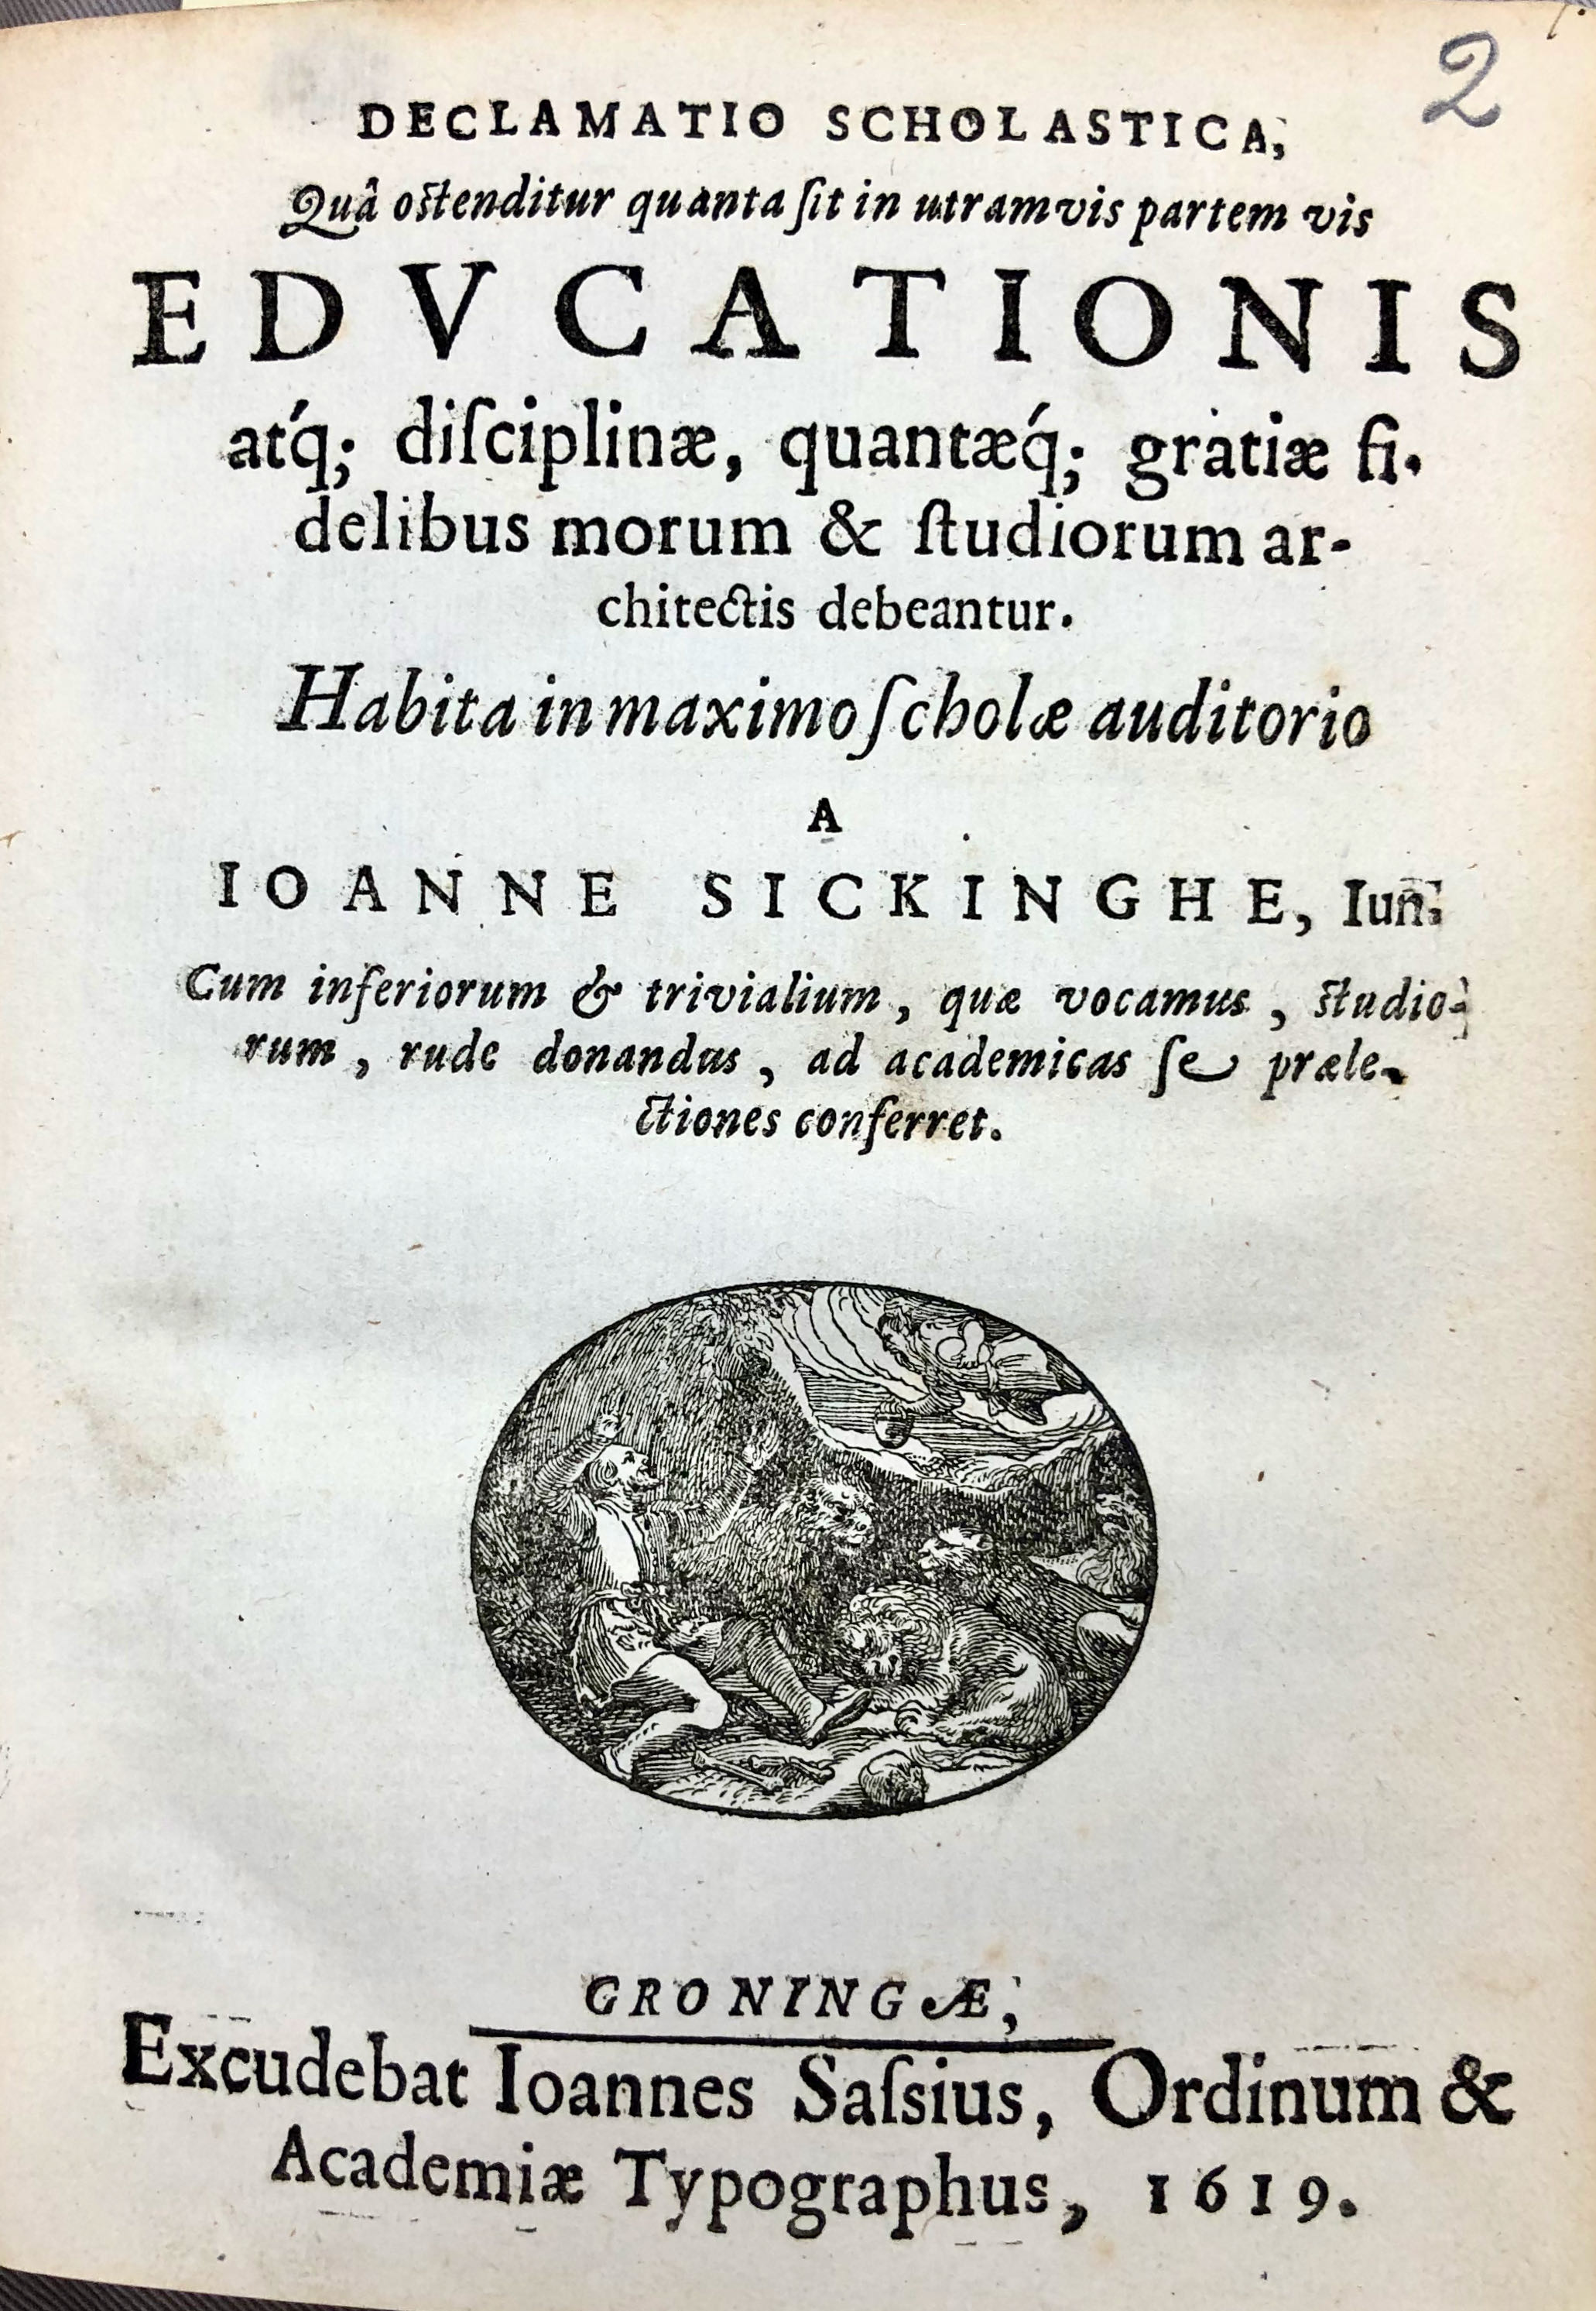 Title page of the speech by Johannes Sickinghe. UBG, uklu ‘JO G 1 (1). As evidenced at the end (dixi ... anno MDCXIX ), the text was both delivered and printed in 1619, in the Aula (maximo auditorio) of the Latin school which was located in the former monastery of the Friars Minor between Broerstraat and Zwanestraat, on the exact site where the University Library now stands.